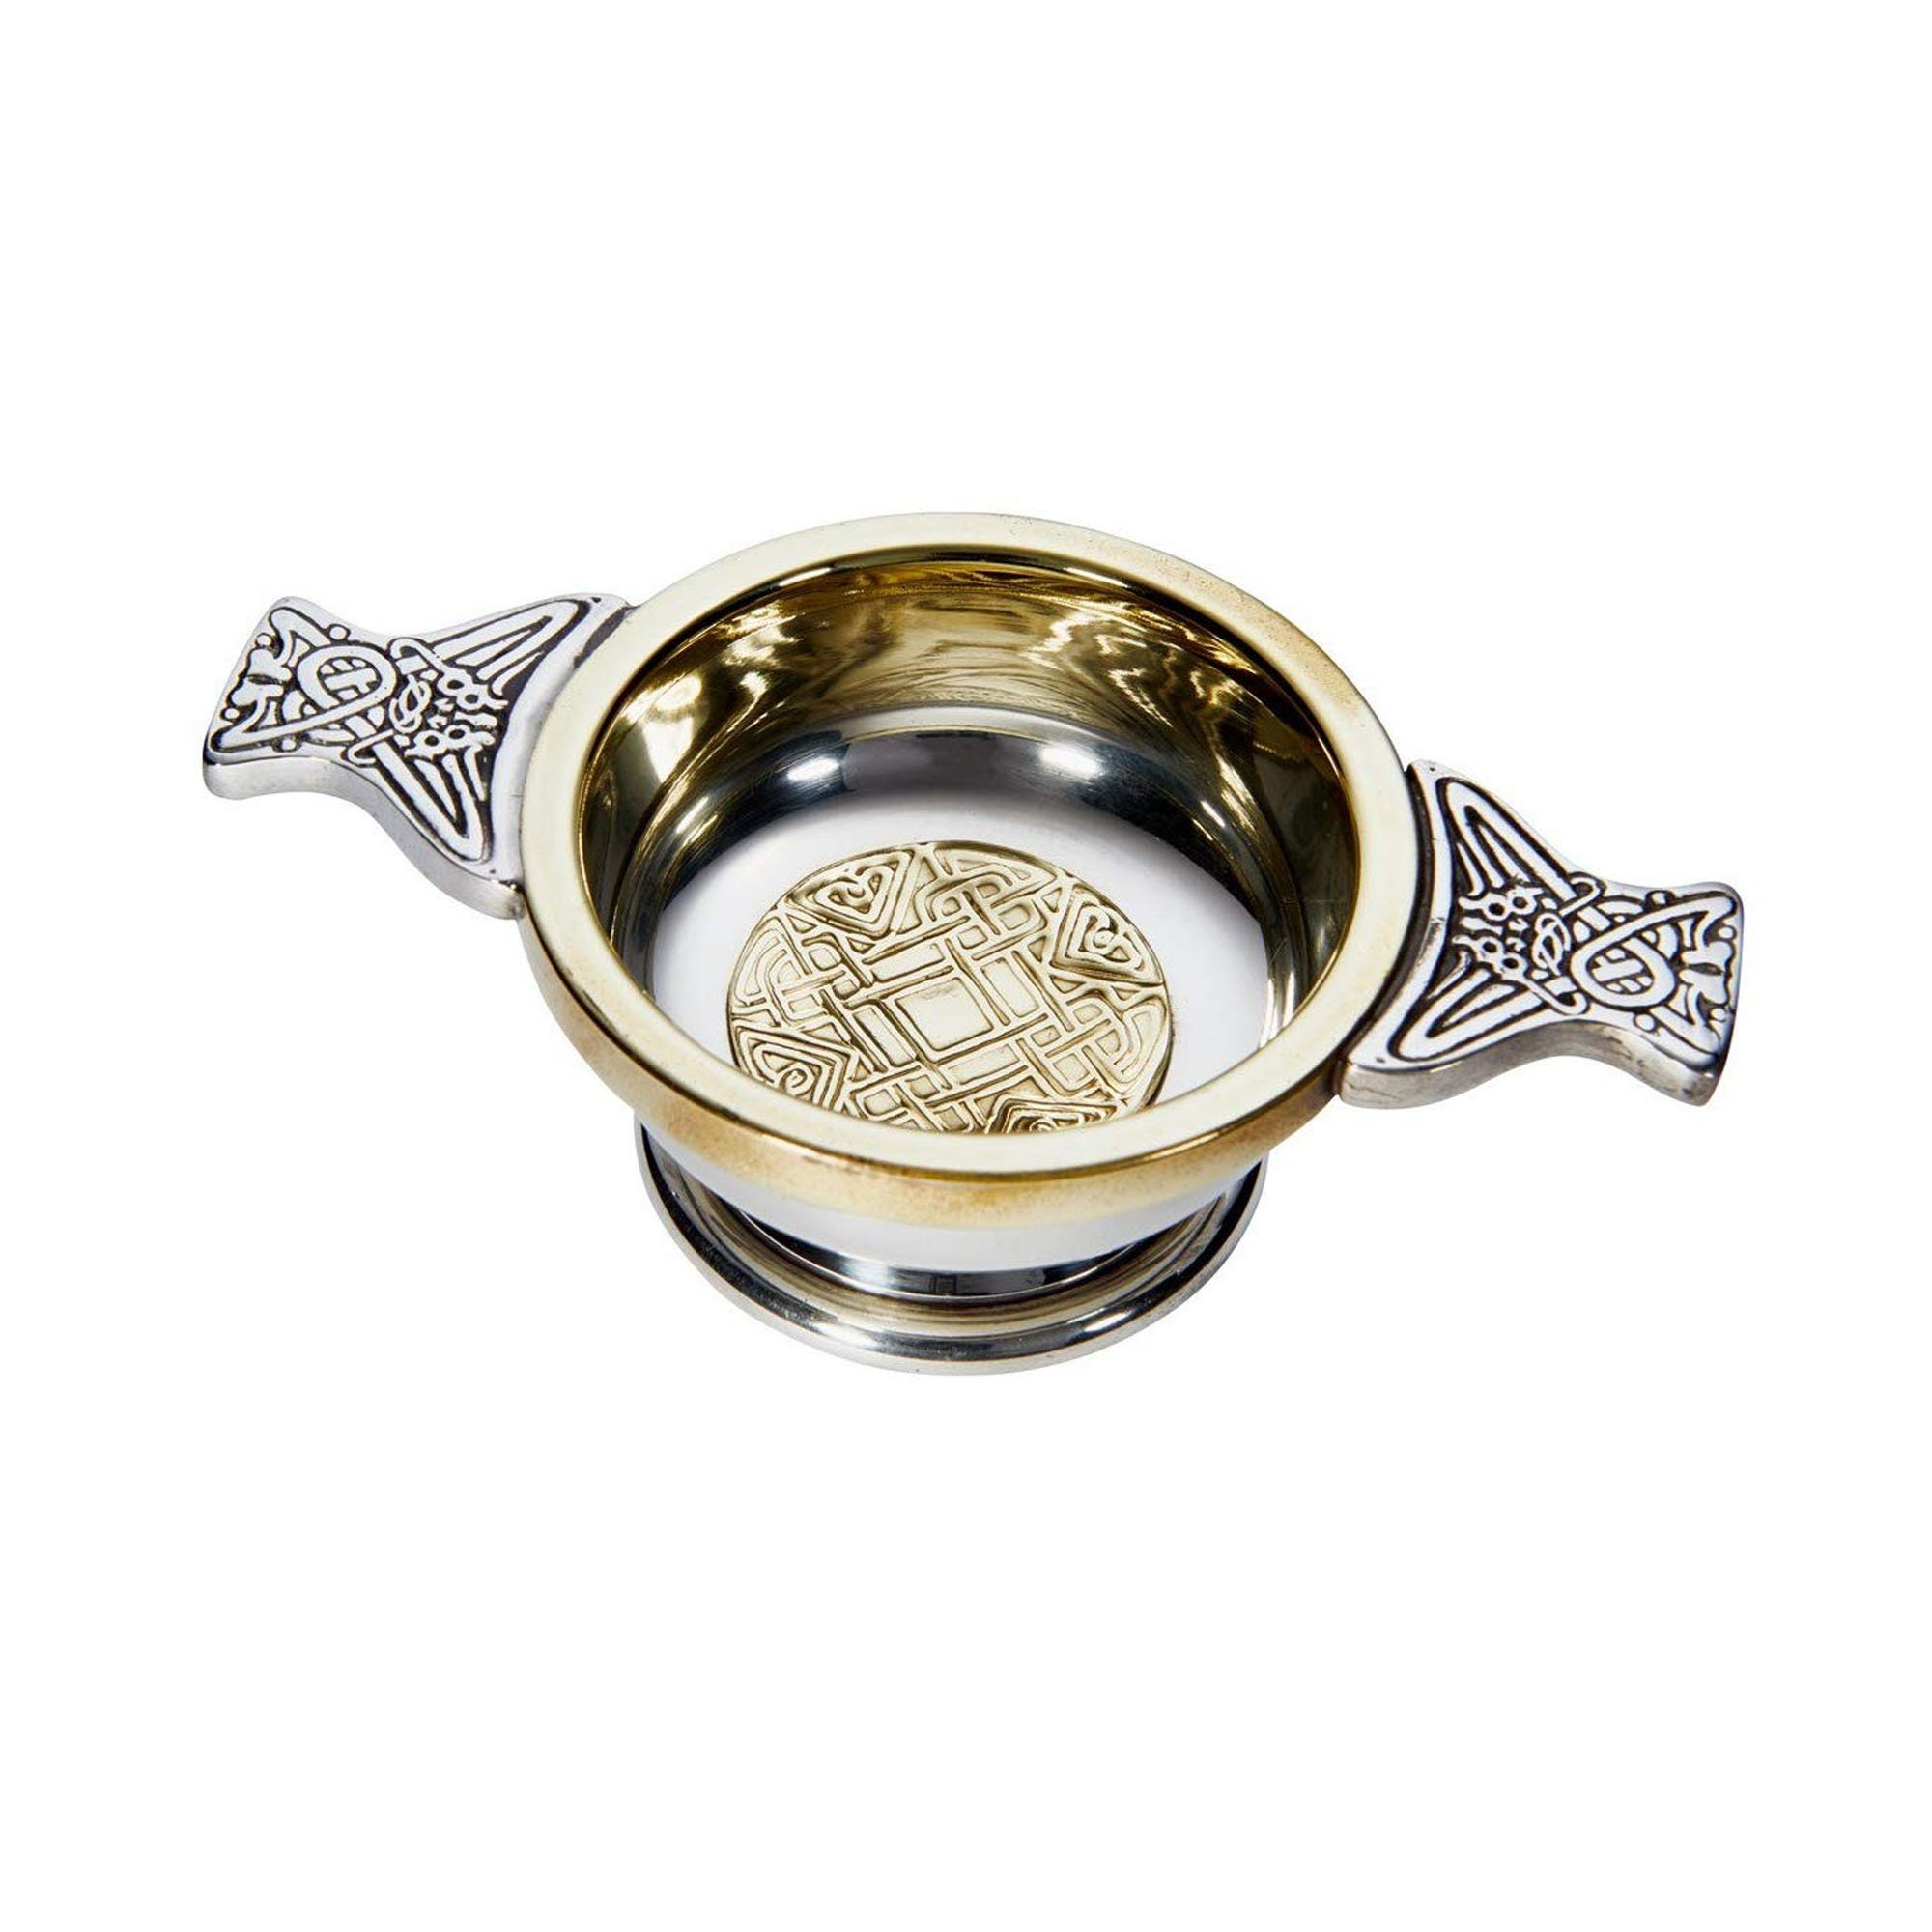 Engrave With Your Message Personalised Pewter Scottish Quaich Bowl 70mm 